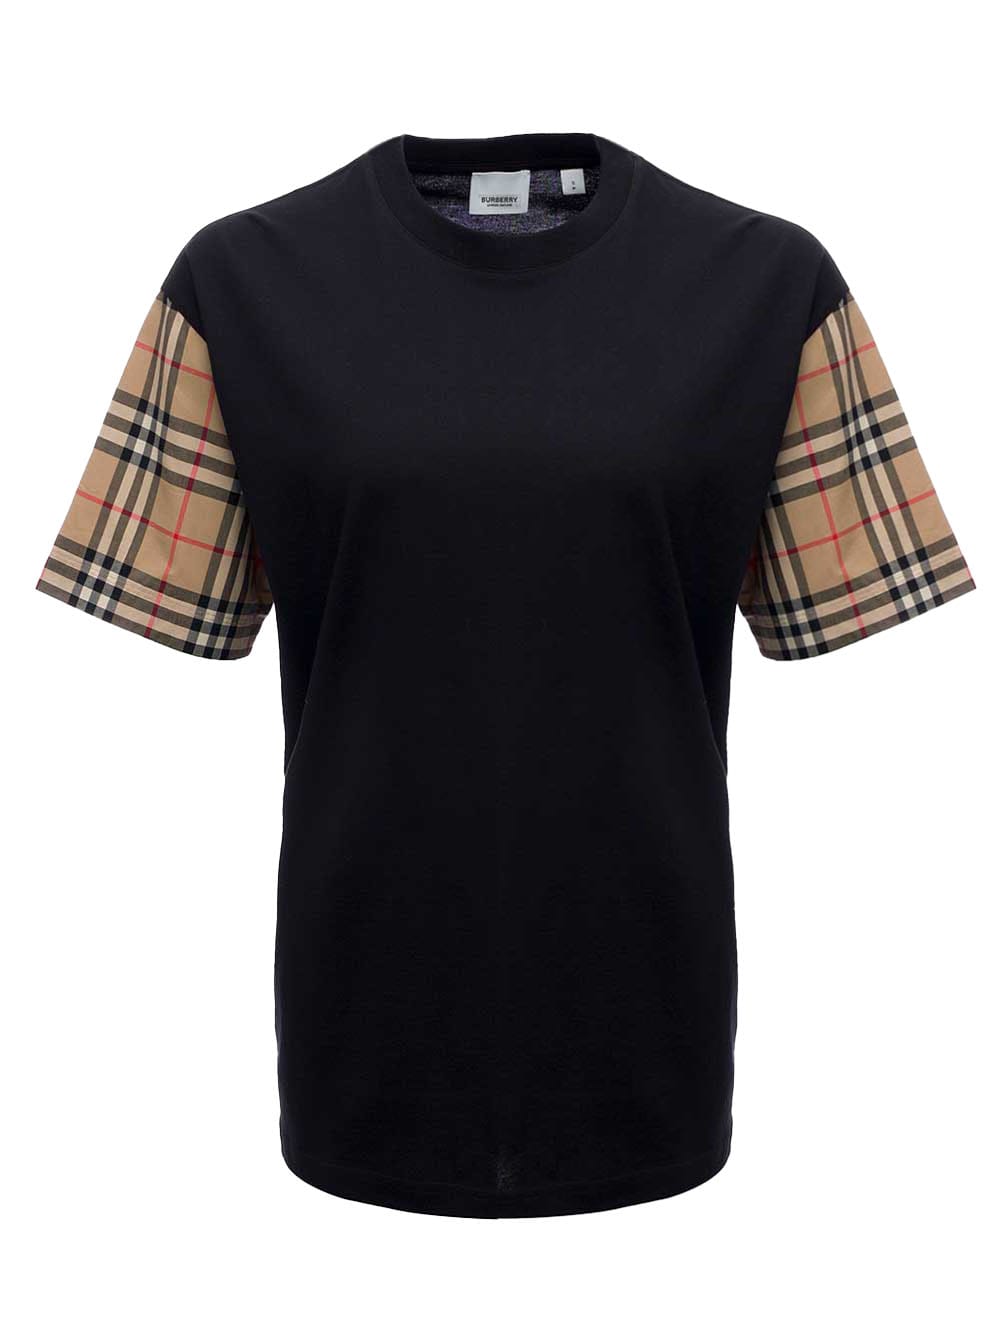 Burberry Black Cotton T-shirt With Vintage Check Sleeves